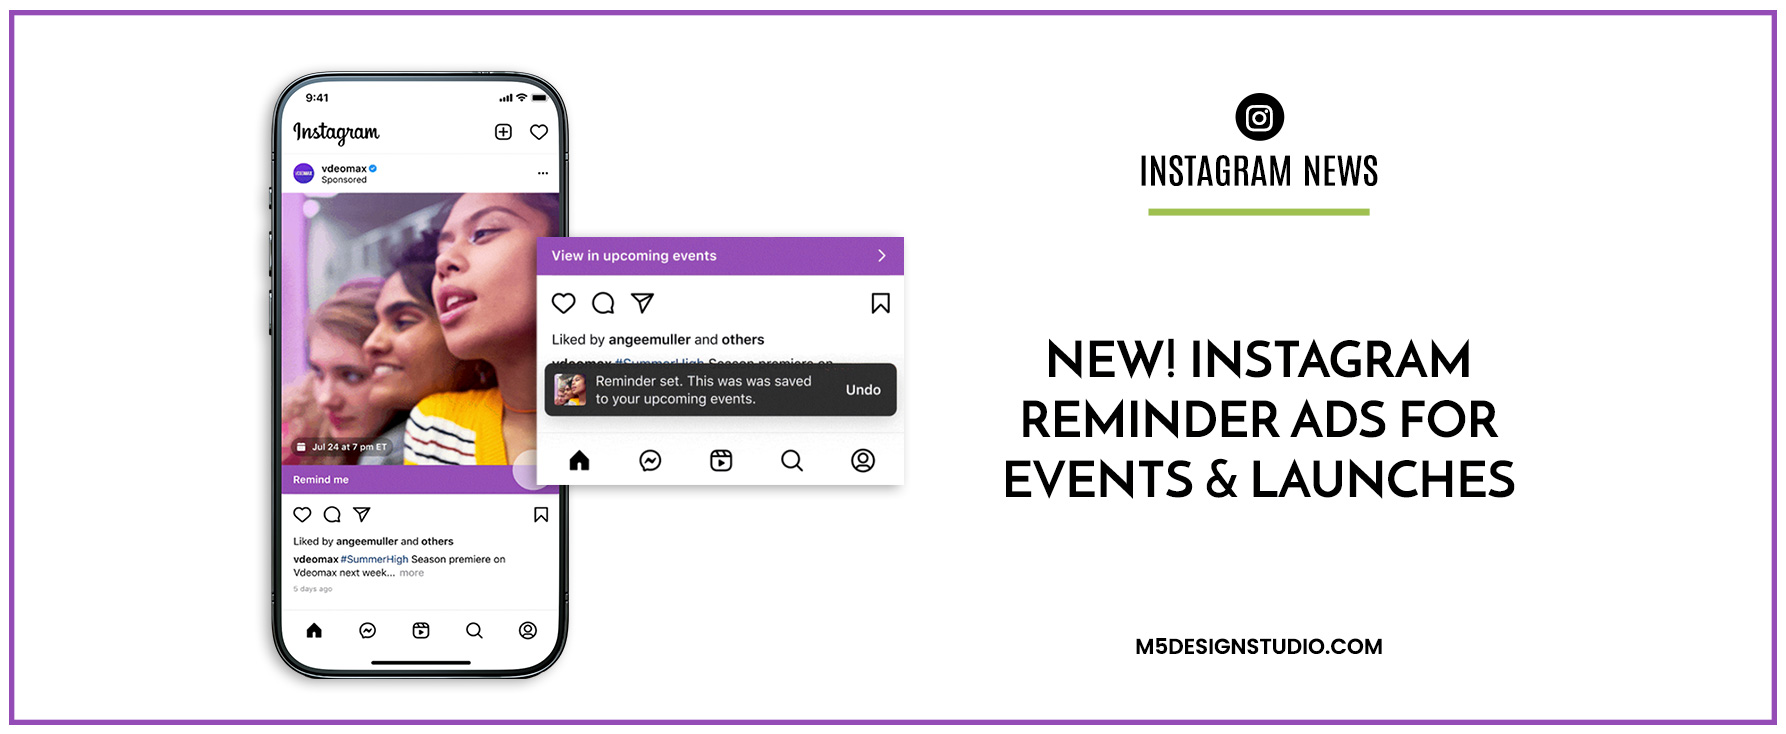 Instagram Reminder Ads: A New Way to Promote Your Events and Launches